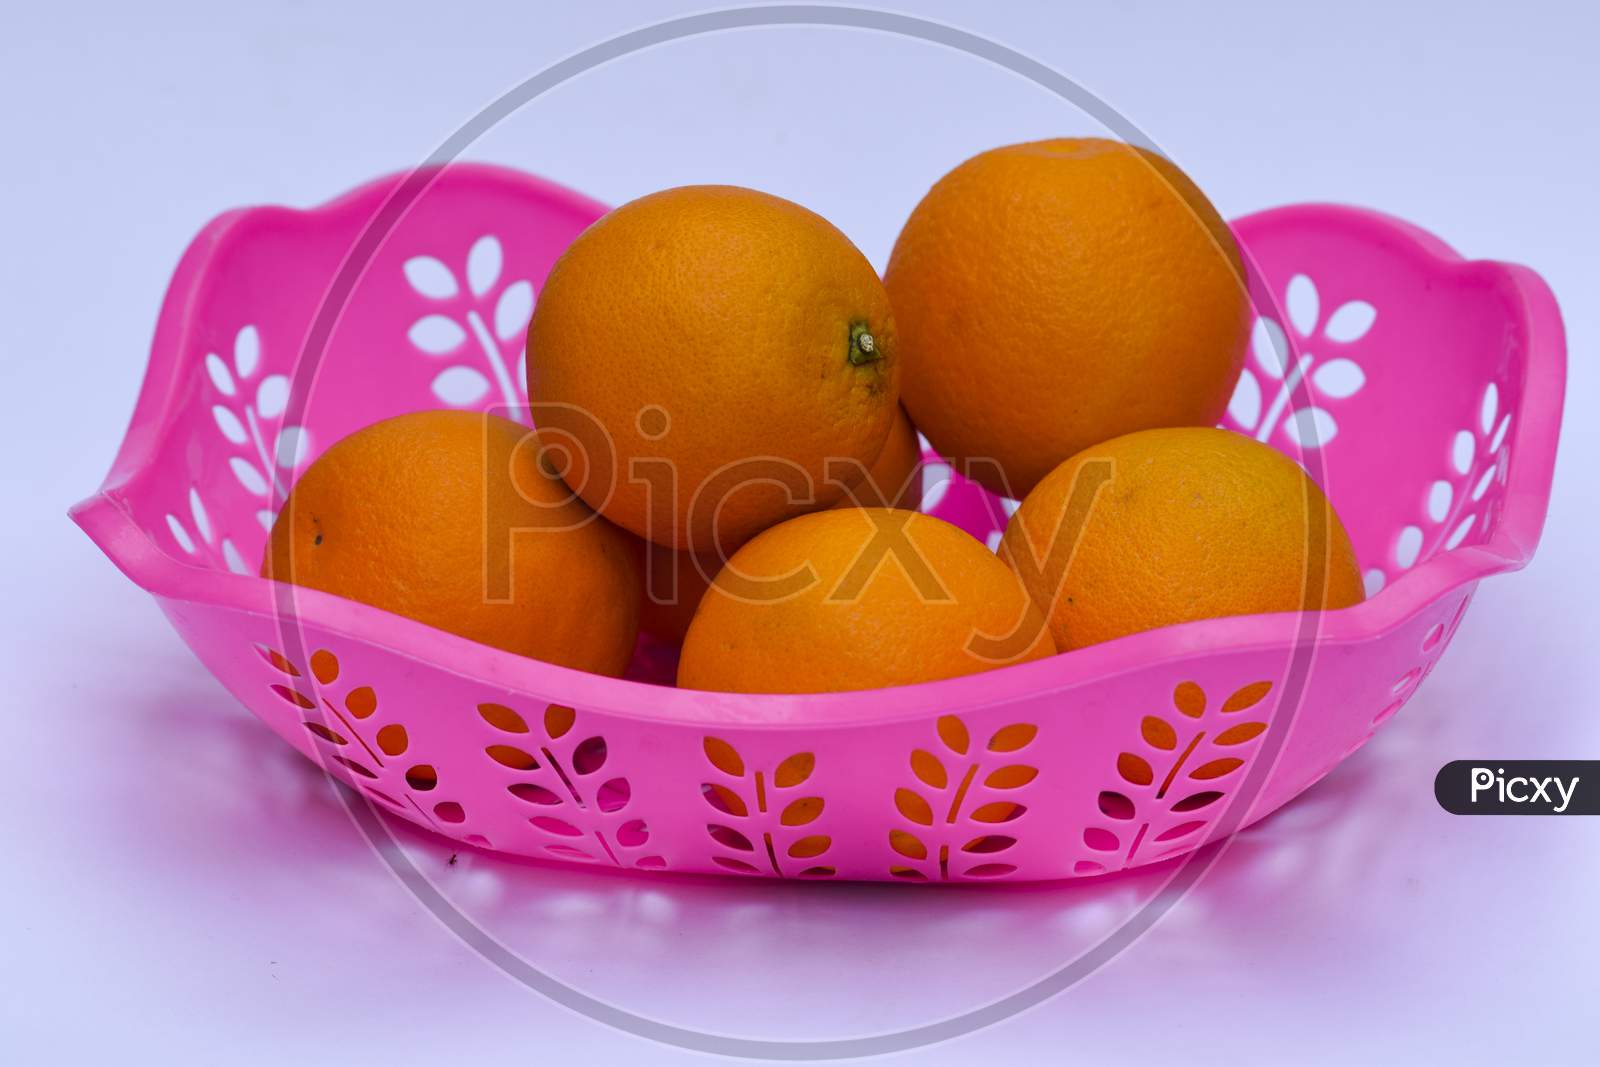 Mandarin Fruit Heap On White Background In Pink Basket. Fresh Fruits From India Asia